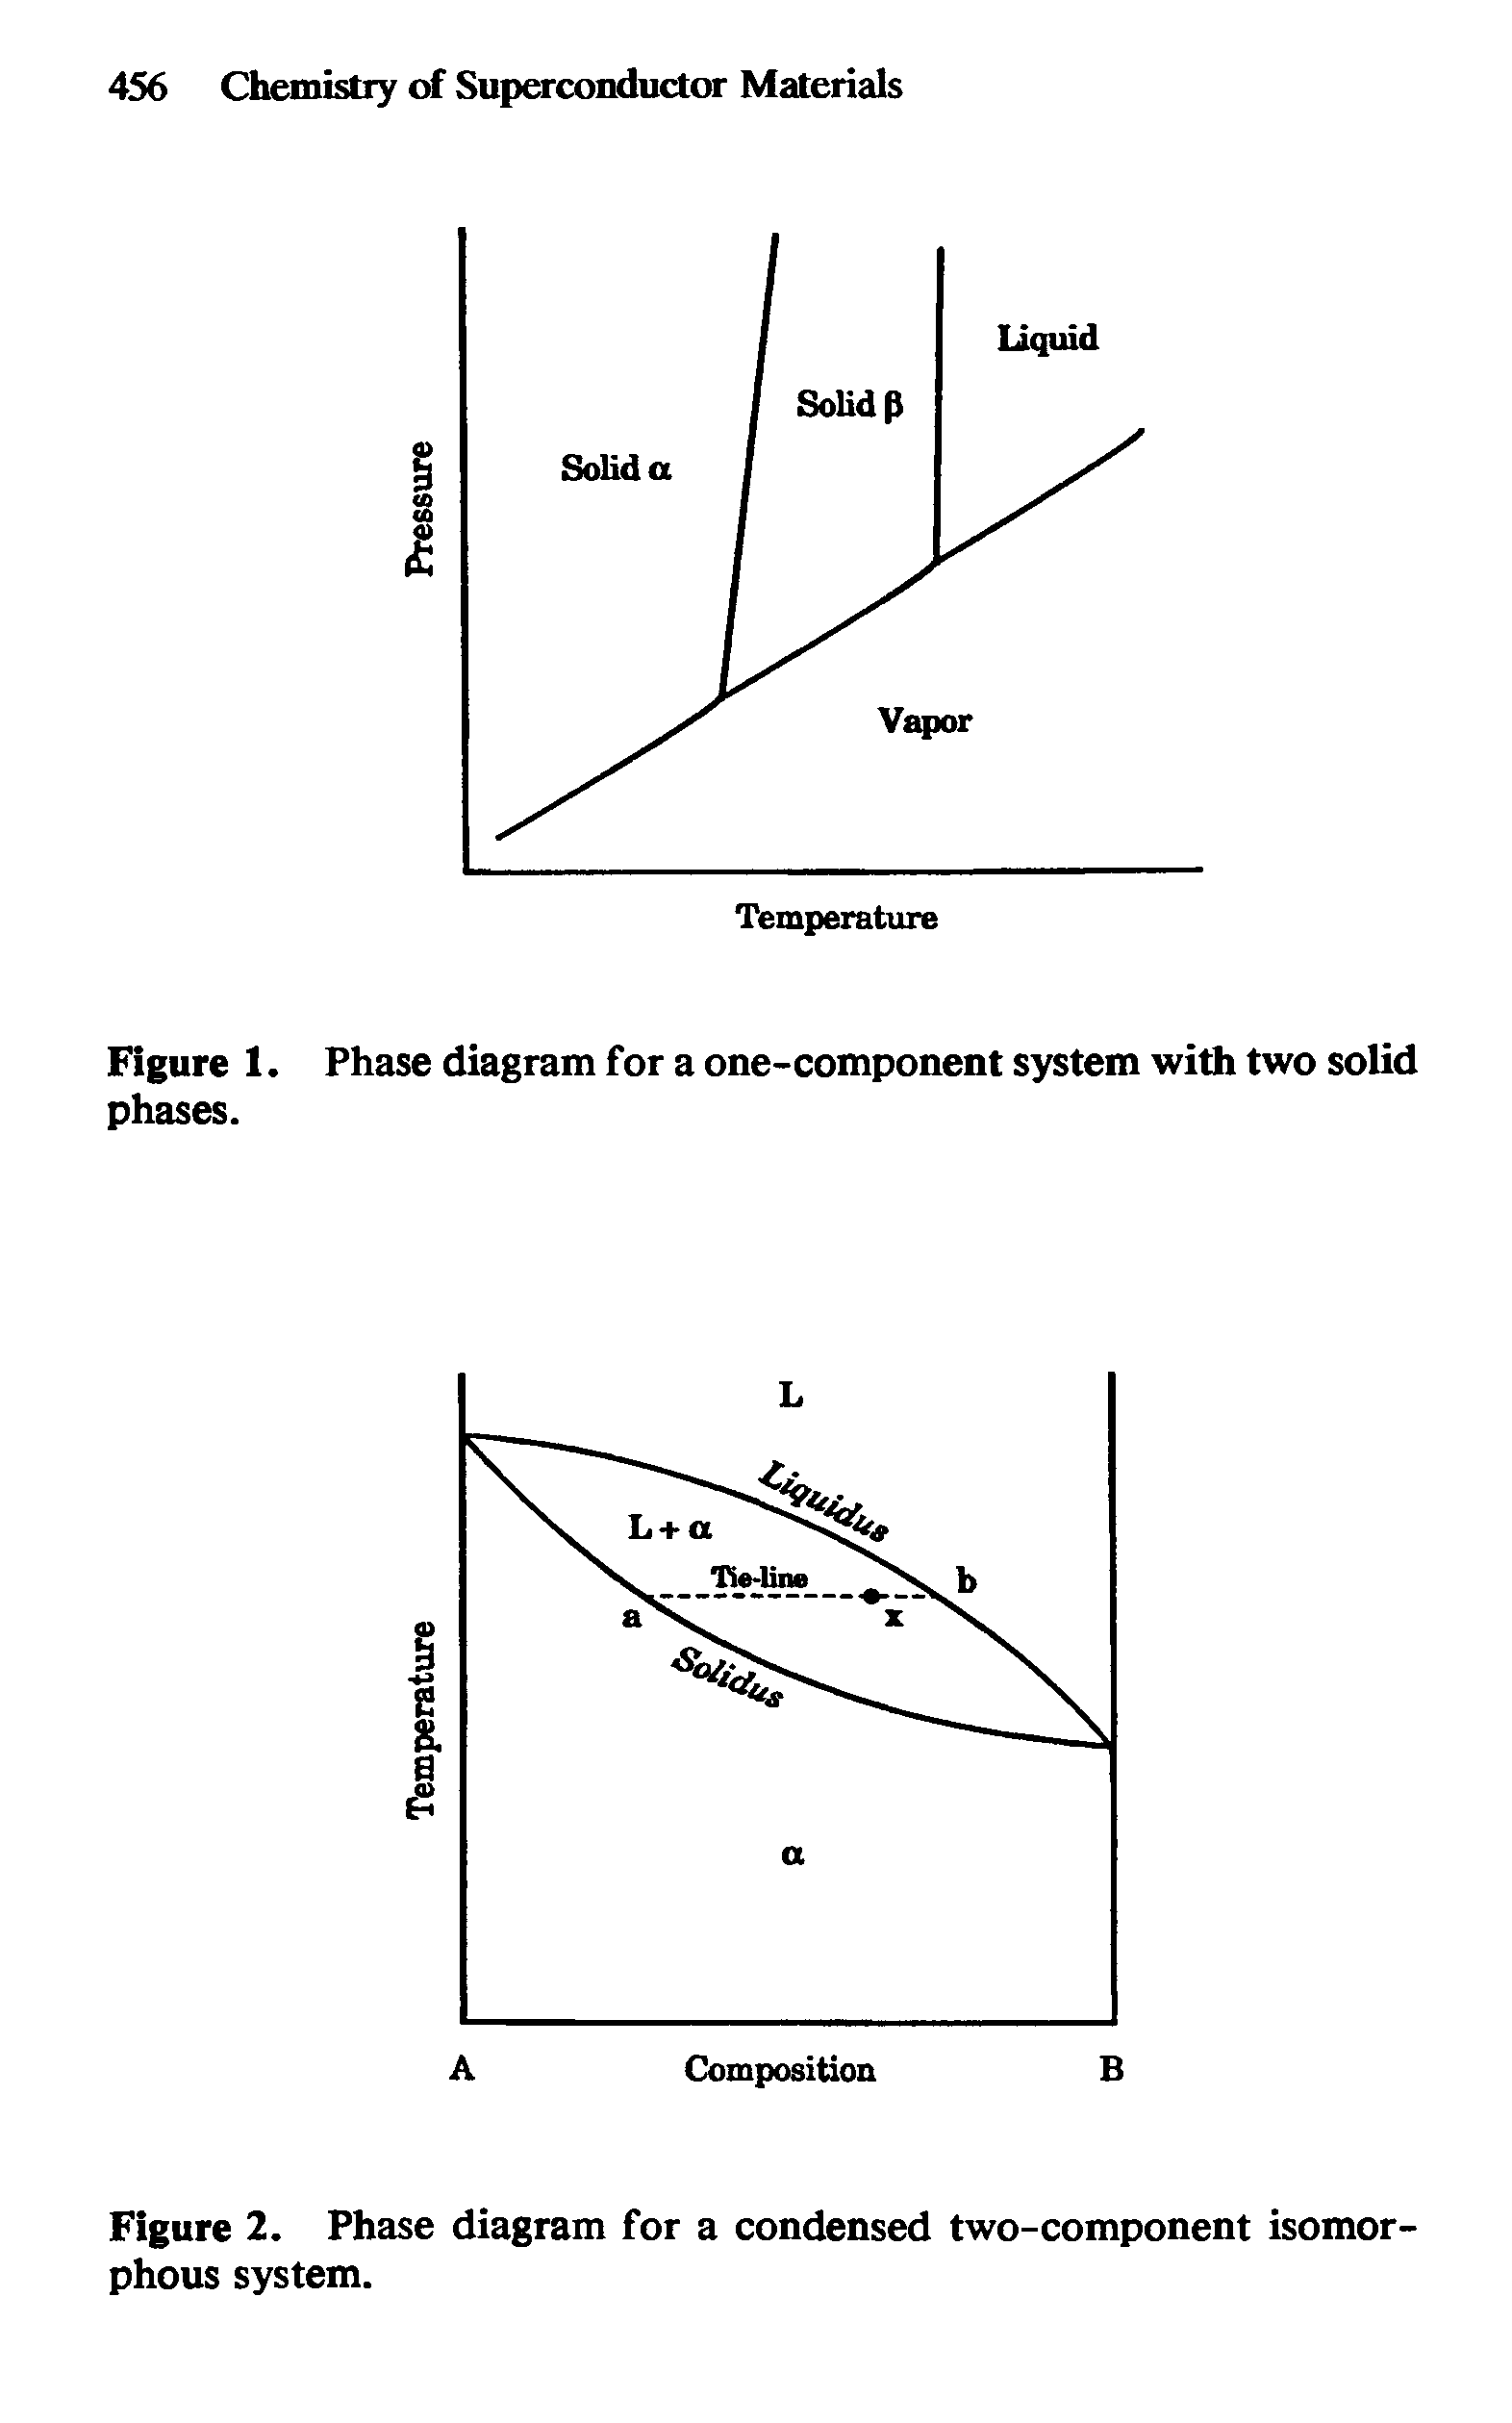 Figure 1. Phase diagram for a one-component system with two solid phases.